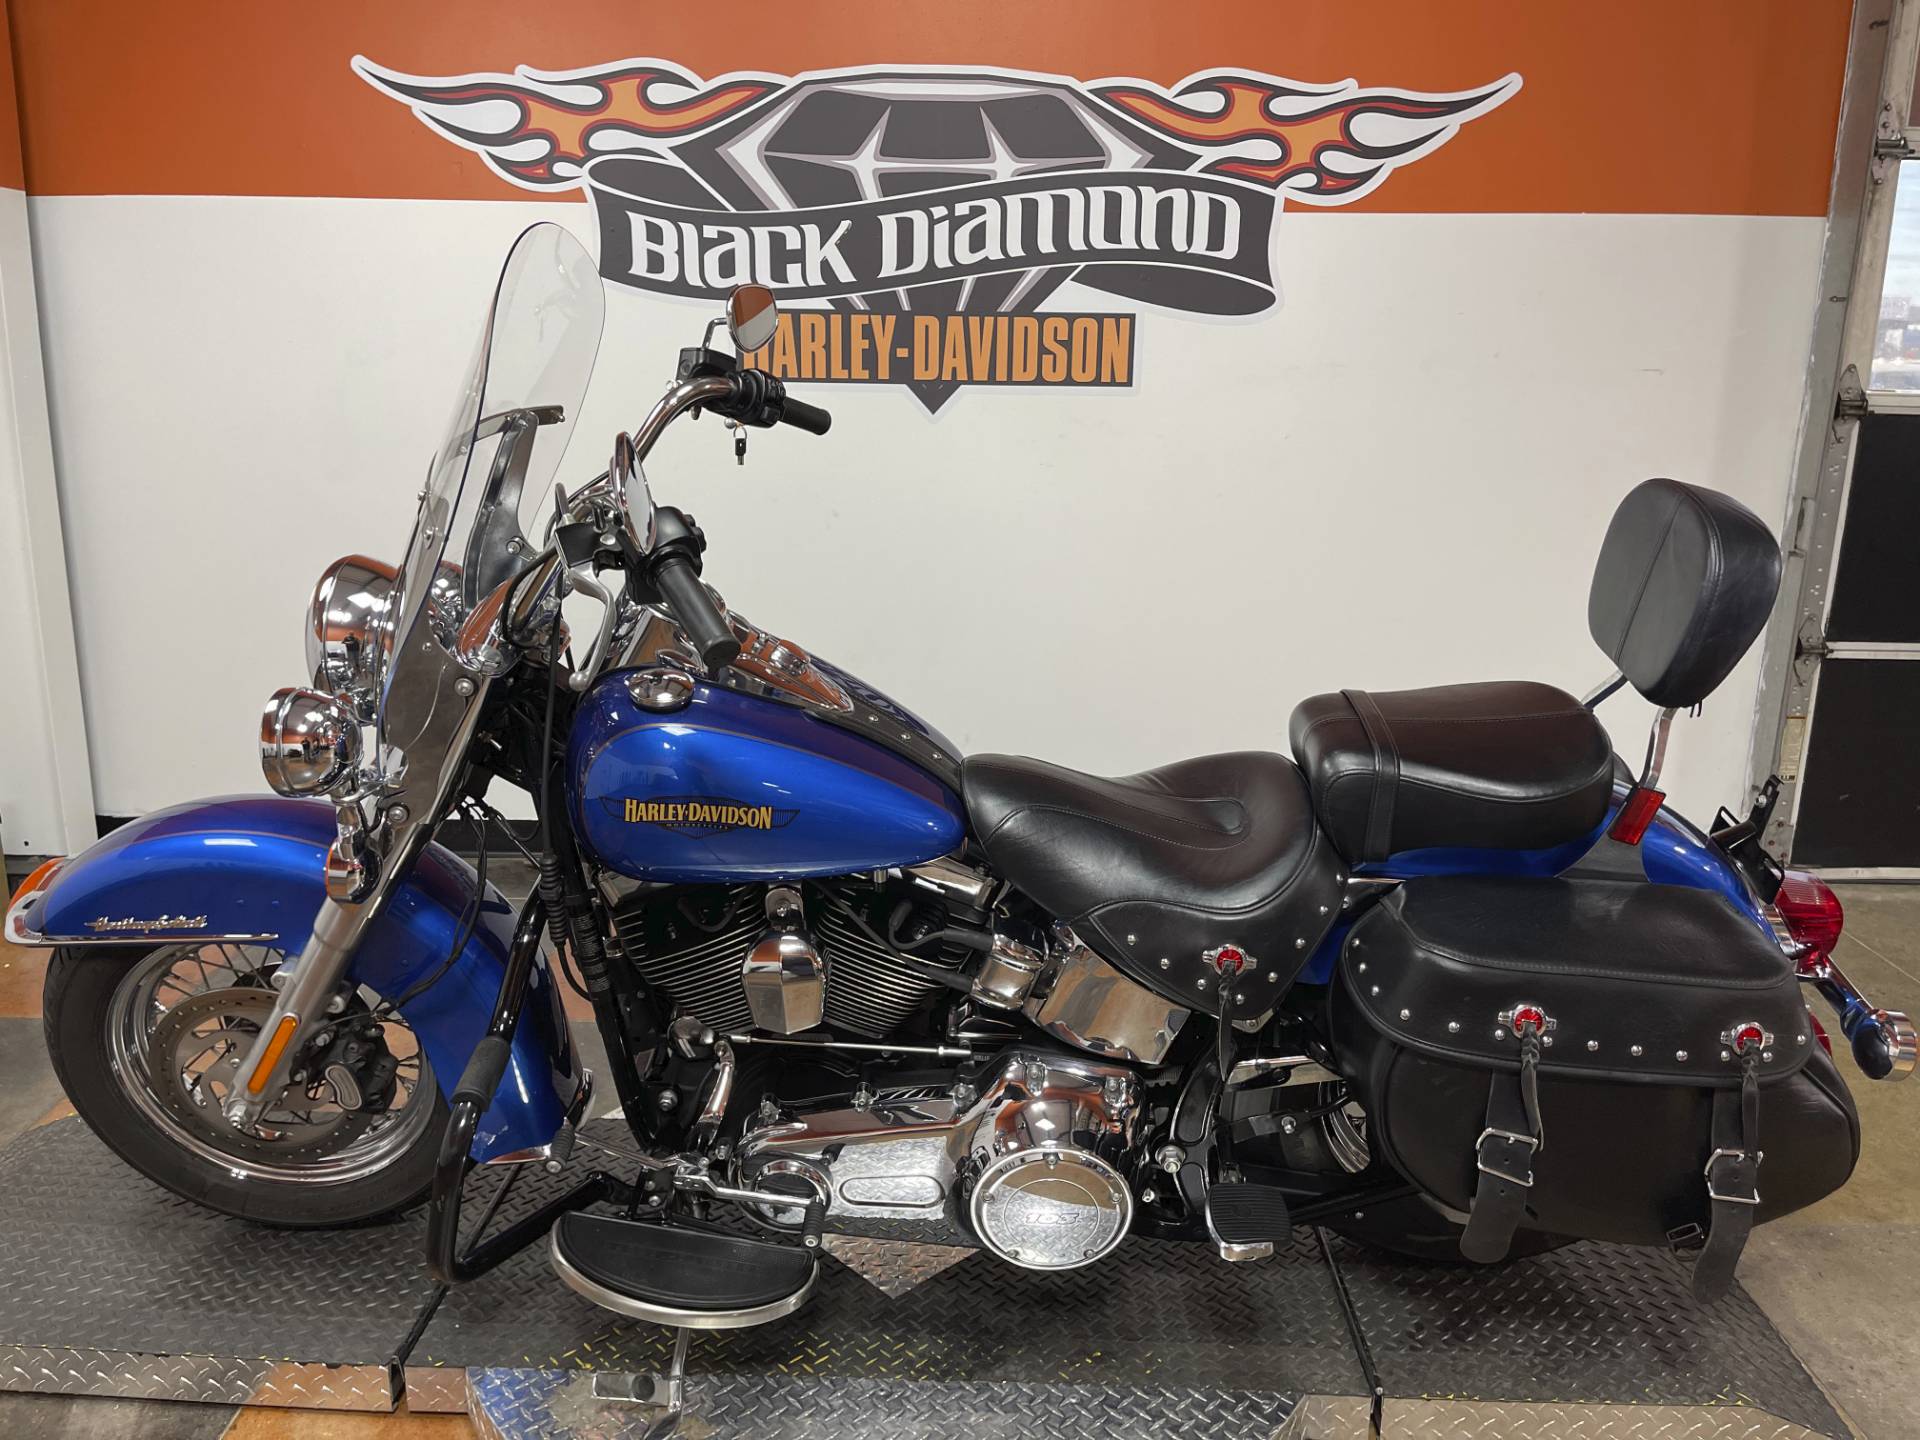 Used 2017 Harley Davidson Heritage Softail Classic Bonneville Blue Fathom Blue Motorcycles In Mount Vernon Il U023317